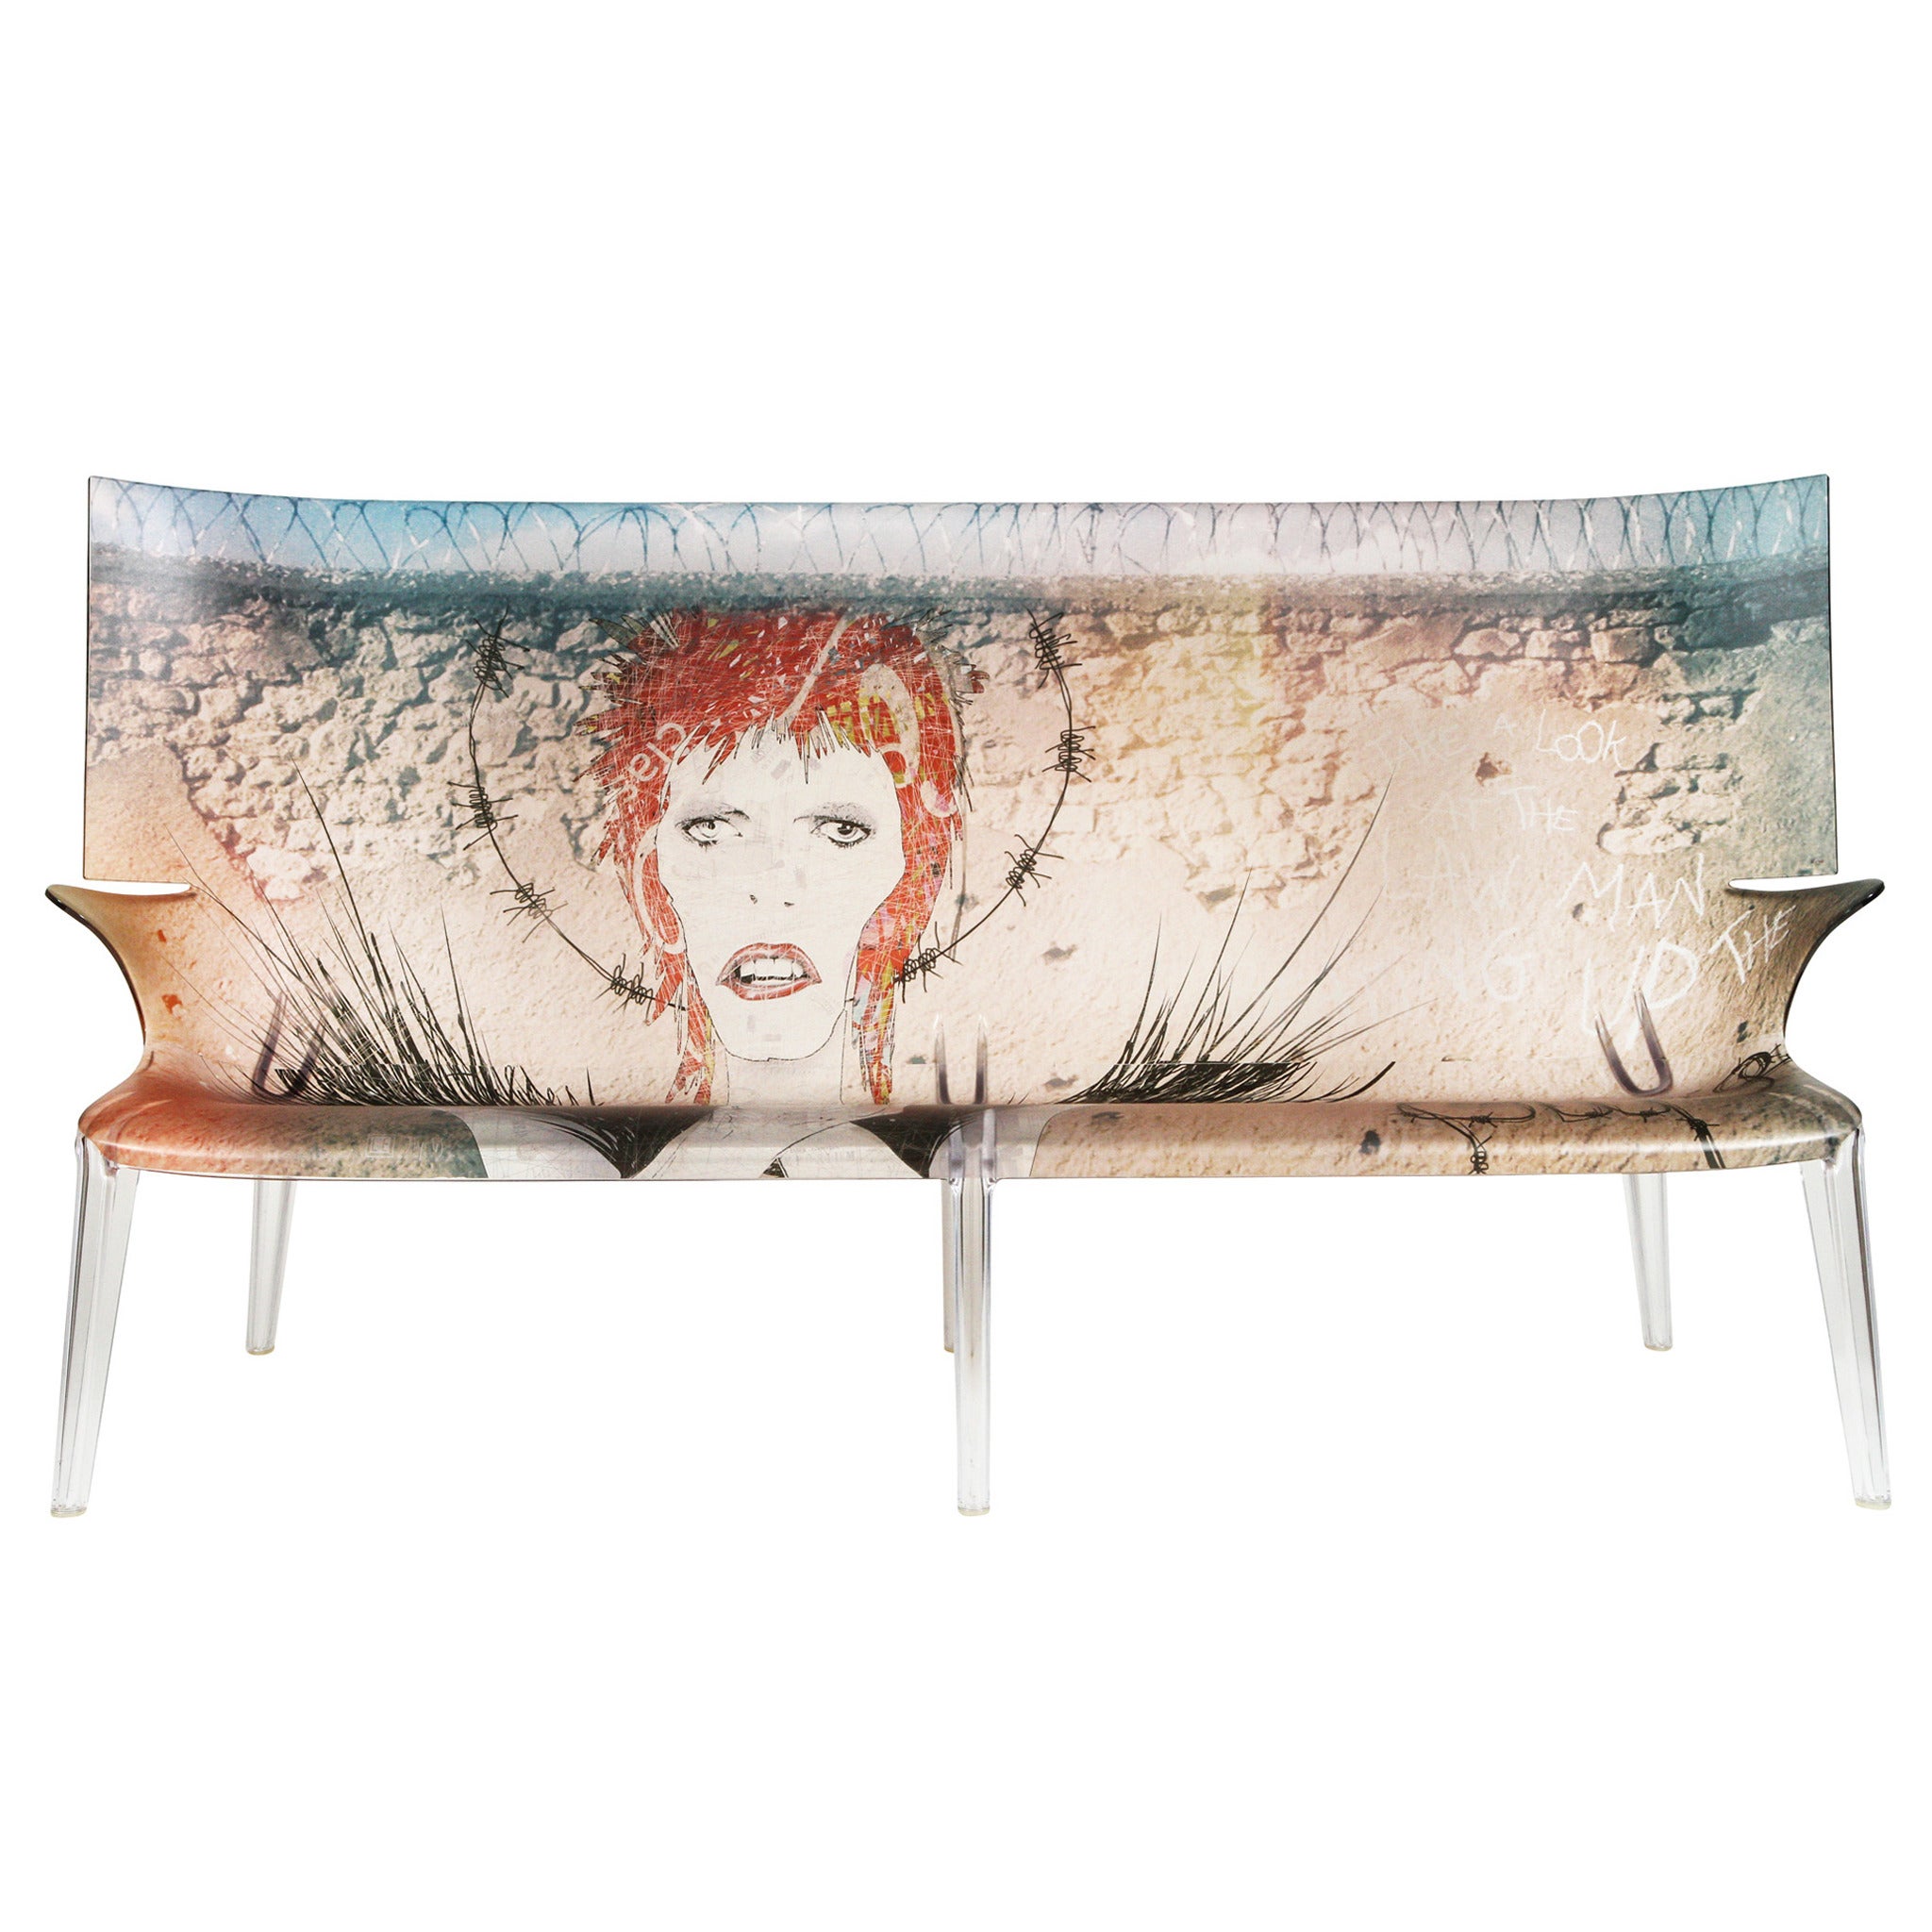 David Bowie "Wrong Guy" Transparent Polycarbonate Uncle Jack Ghost Sofa For Sale